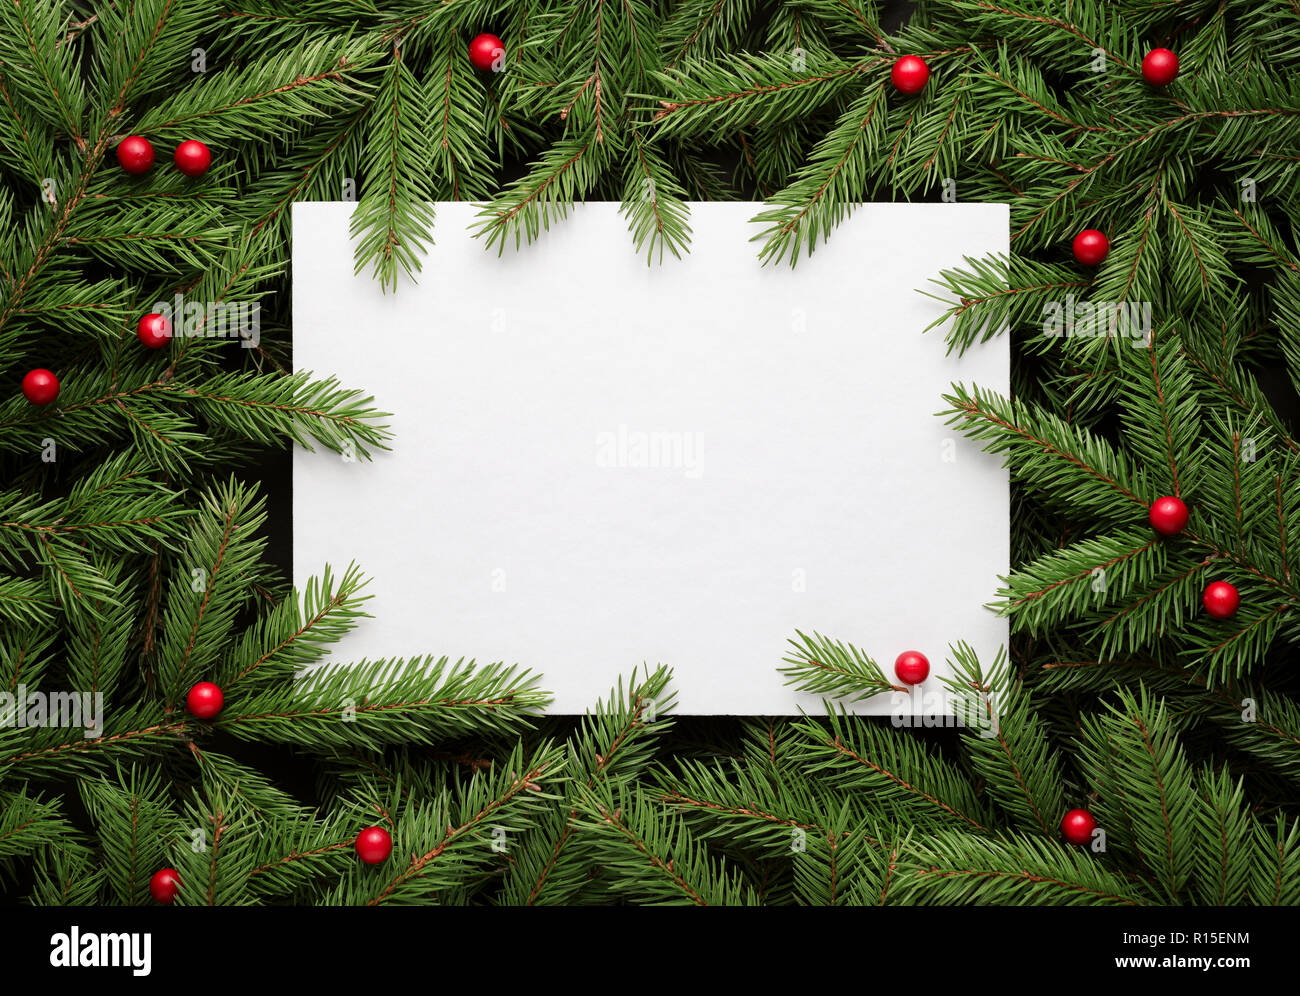 Christmas card background. Paper notice sheet with copy space for text.  Decorative frame of fir branches and holly berries. Flat lay, top view Stock Photo